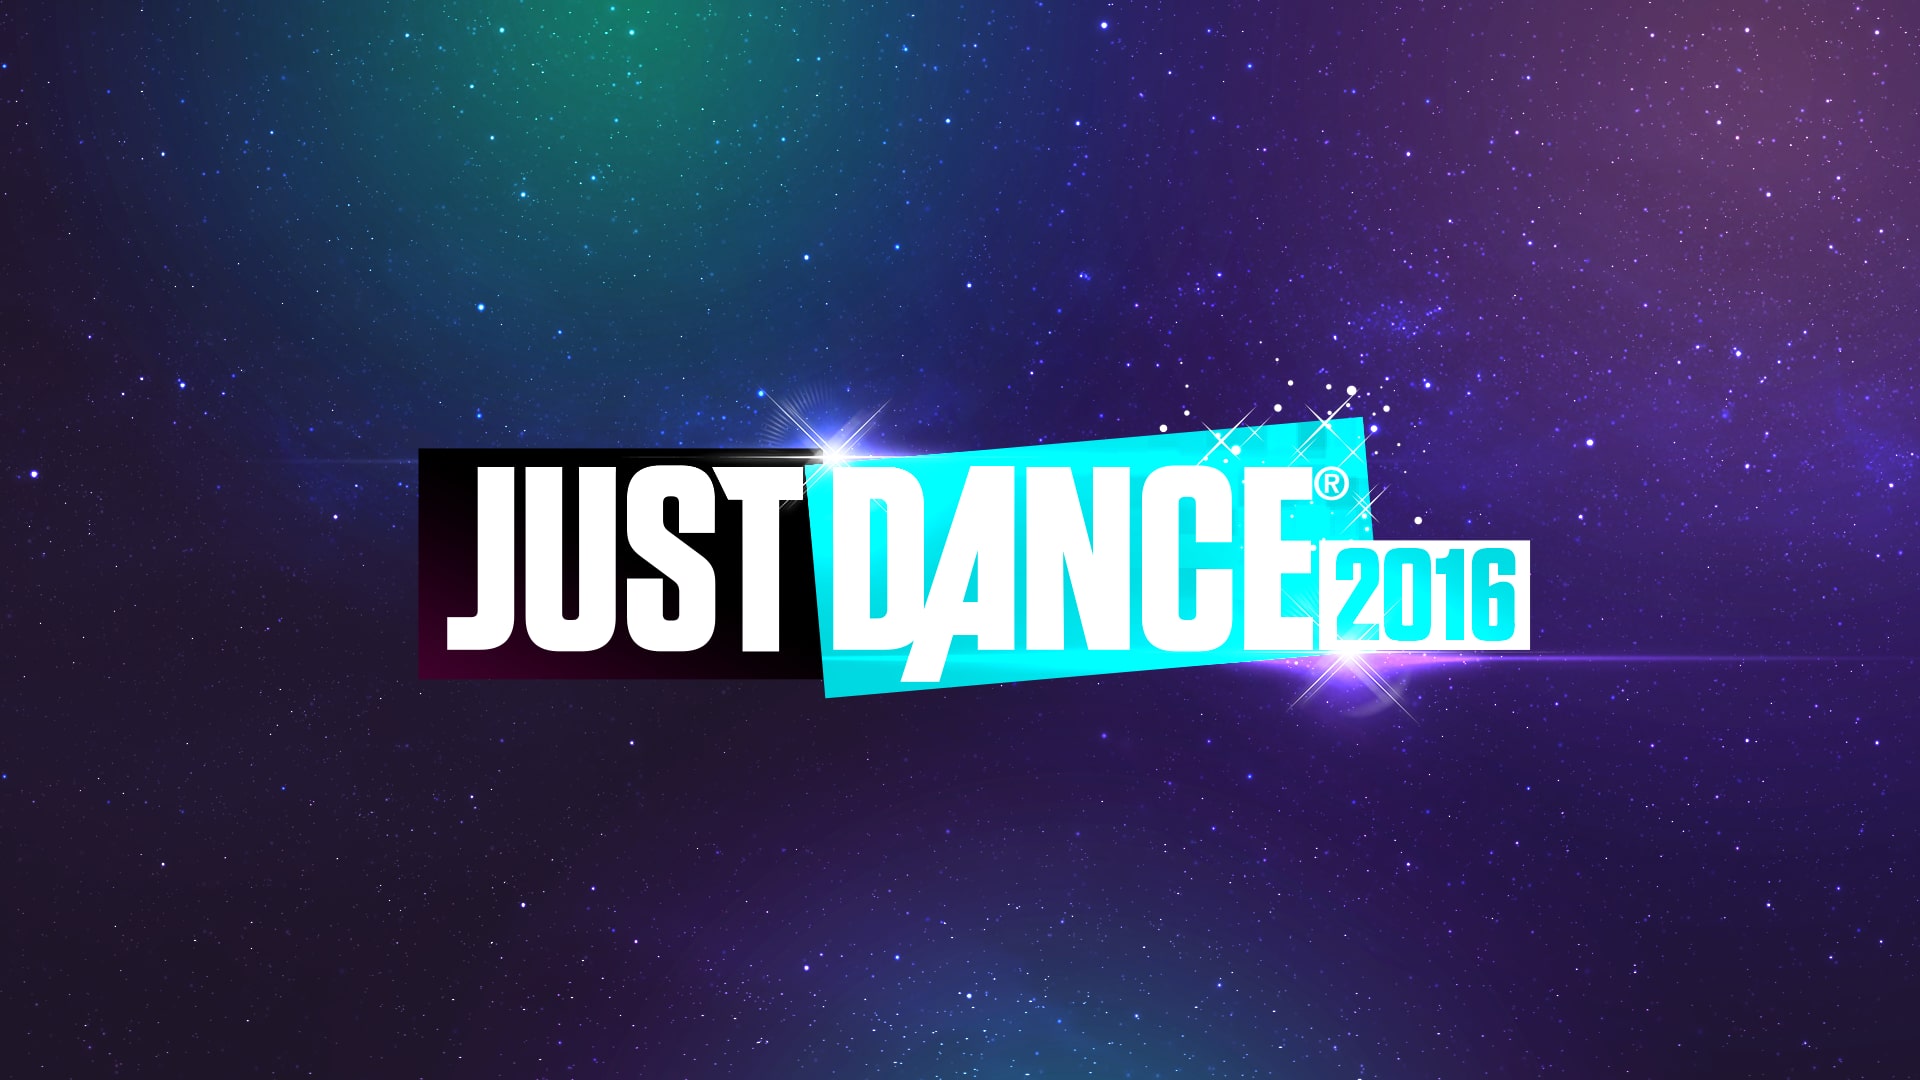 Just Dance Unlimited - 3 Month Pass